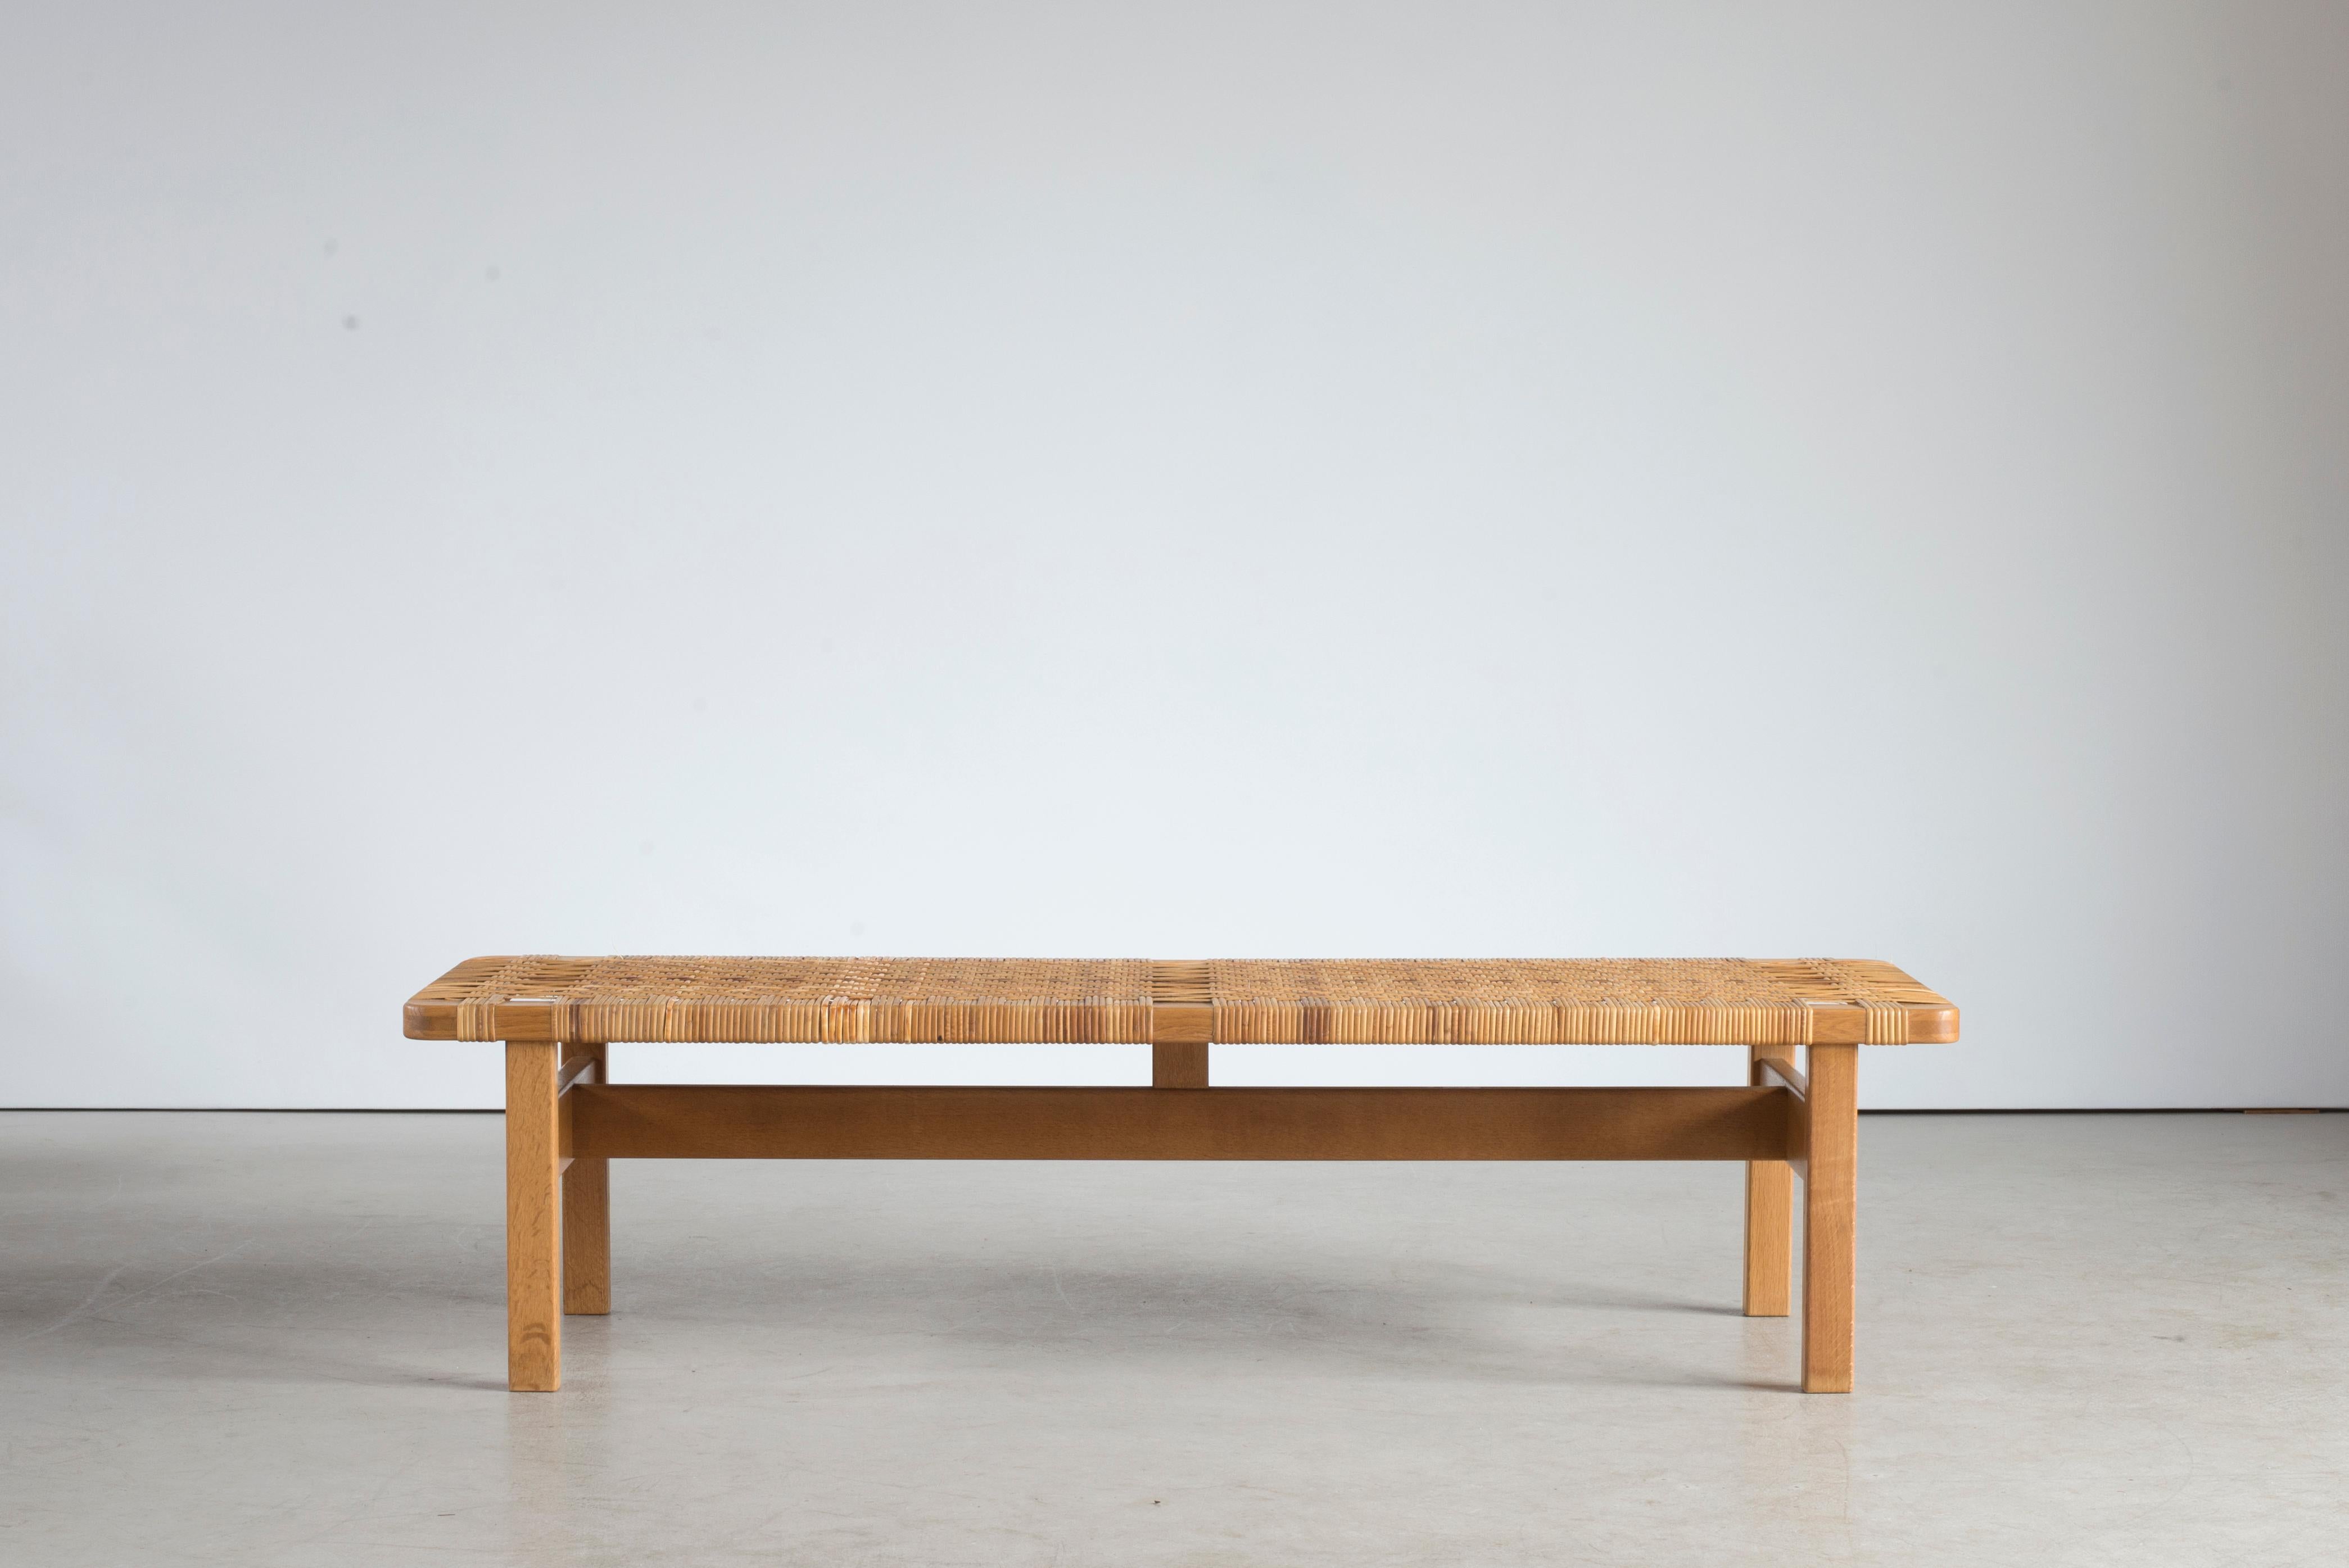 Børge Mogensen. An oak bench with top of woven cane. Manufactured by Fredericia Furniture.